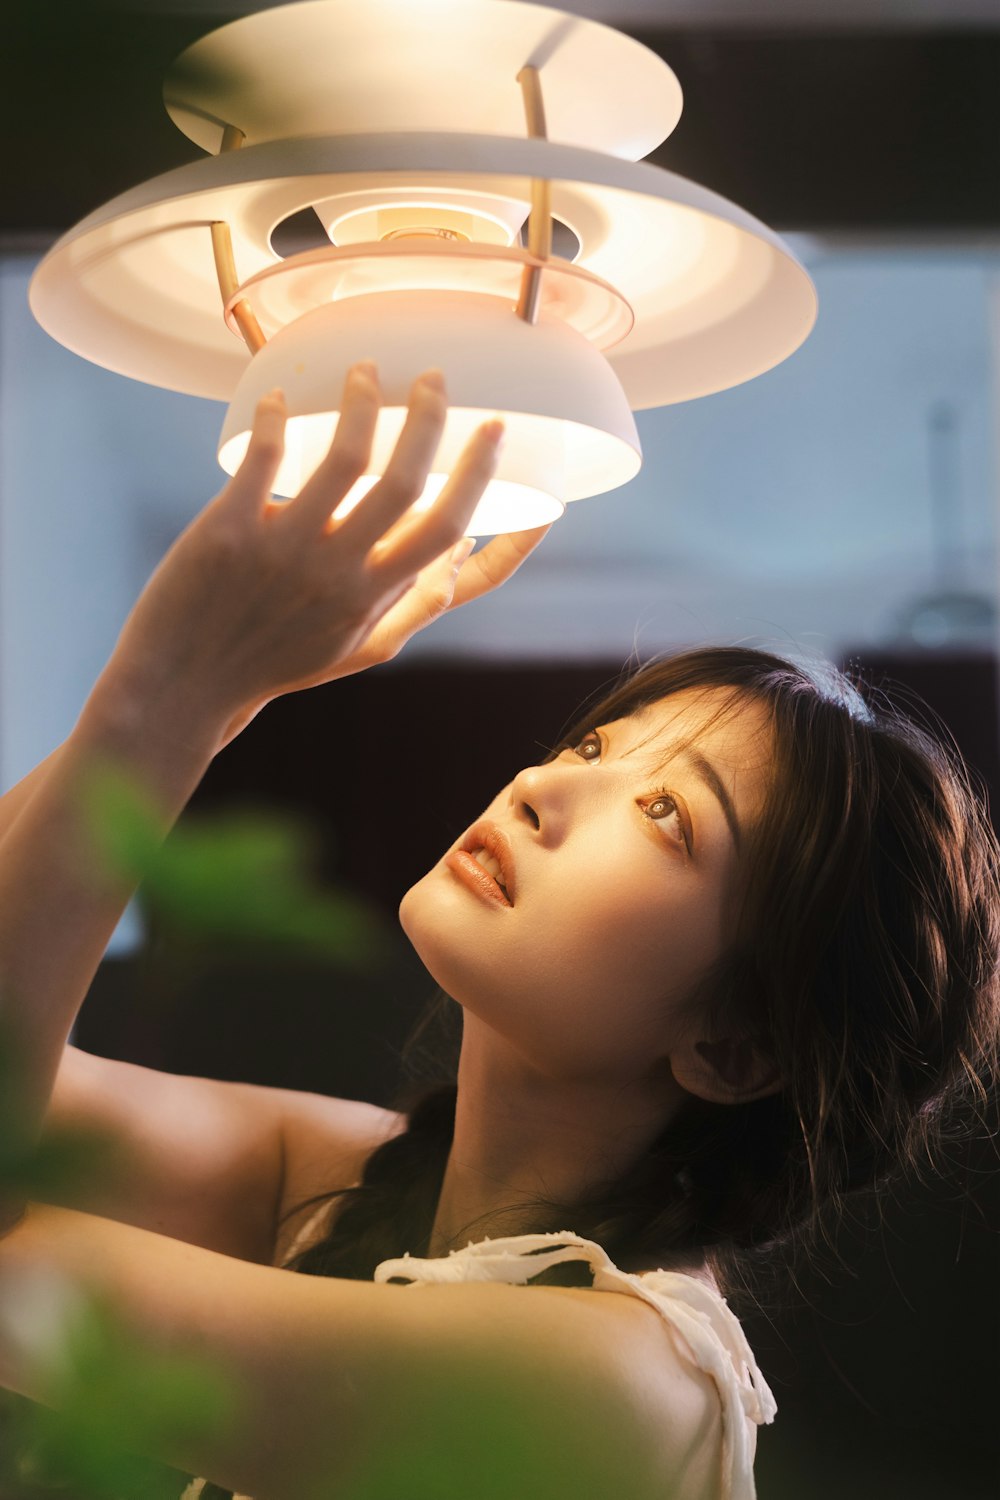 a woman holding a light above her head